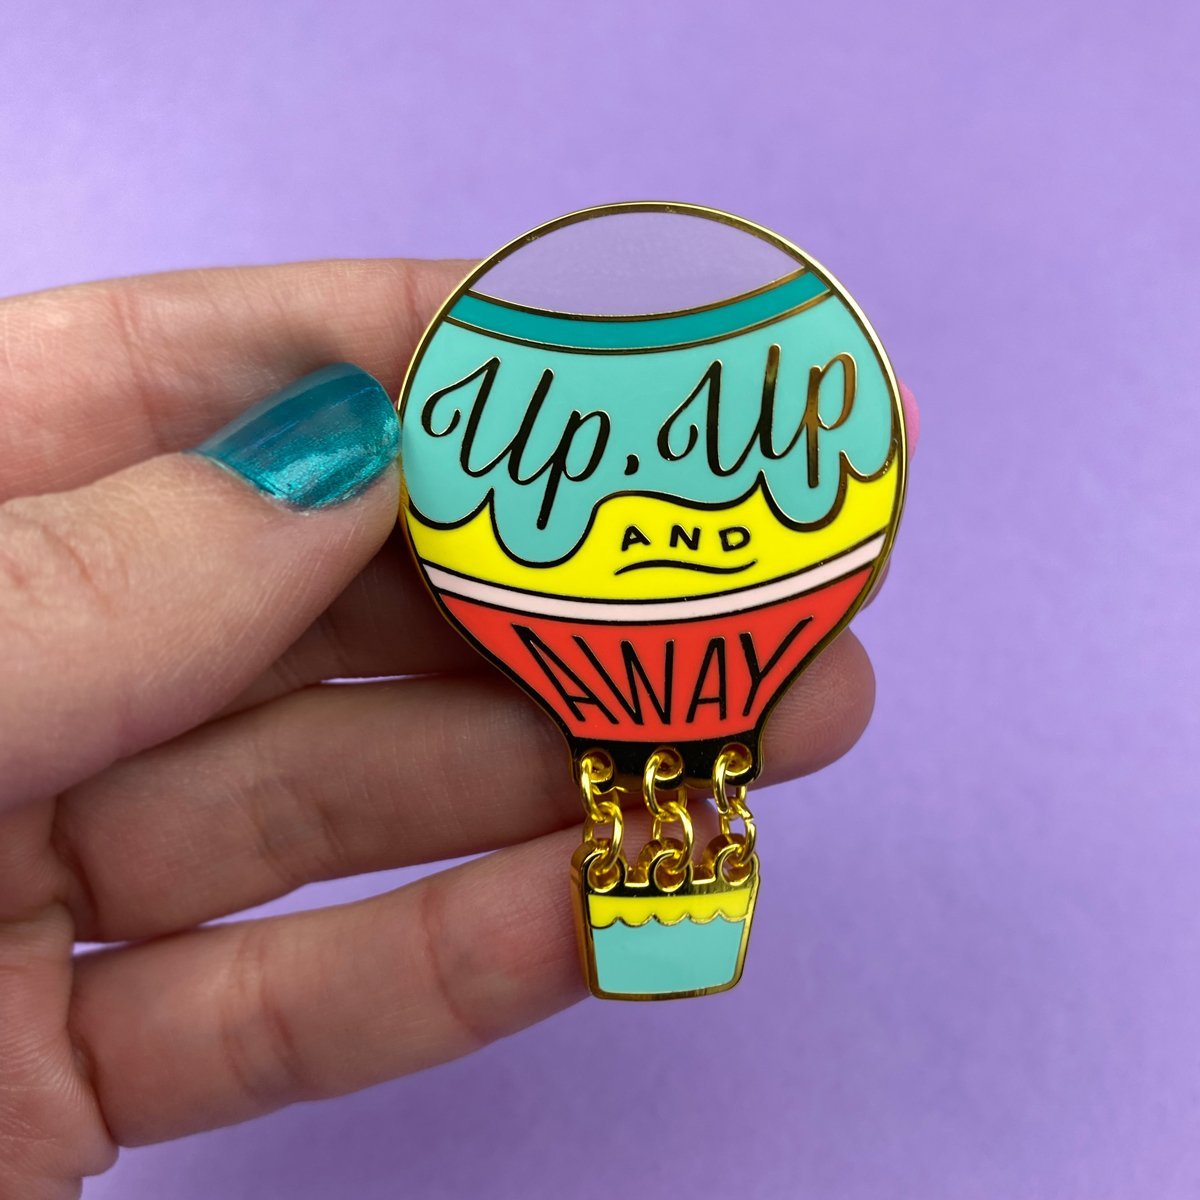 Up, Up and Away Enamel Pin - Rockamilly-Jewellery-Vintage